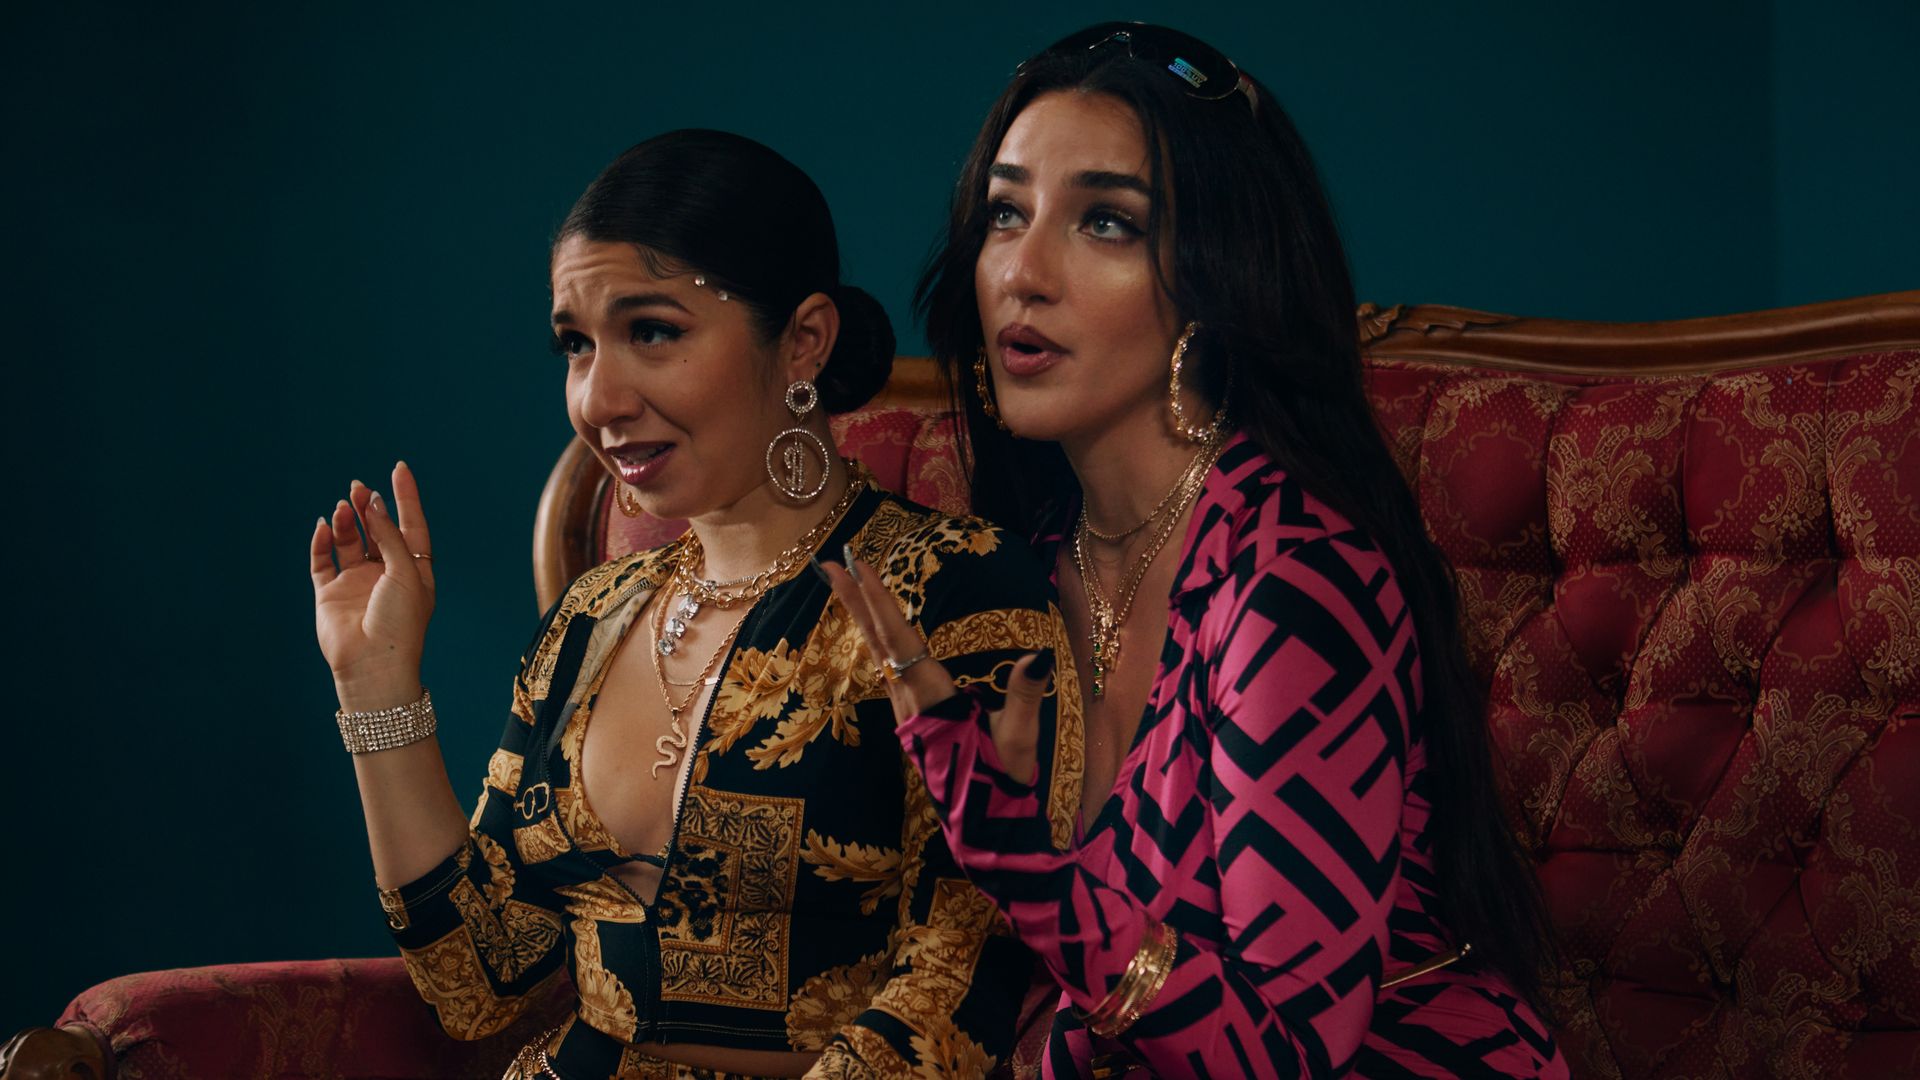 Two women in tight spandex outfits, heavy makeup and hoop earrings sit on a couch and look concerned. 